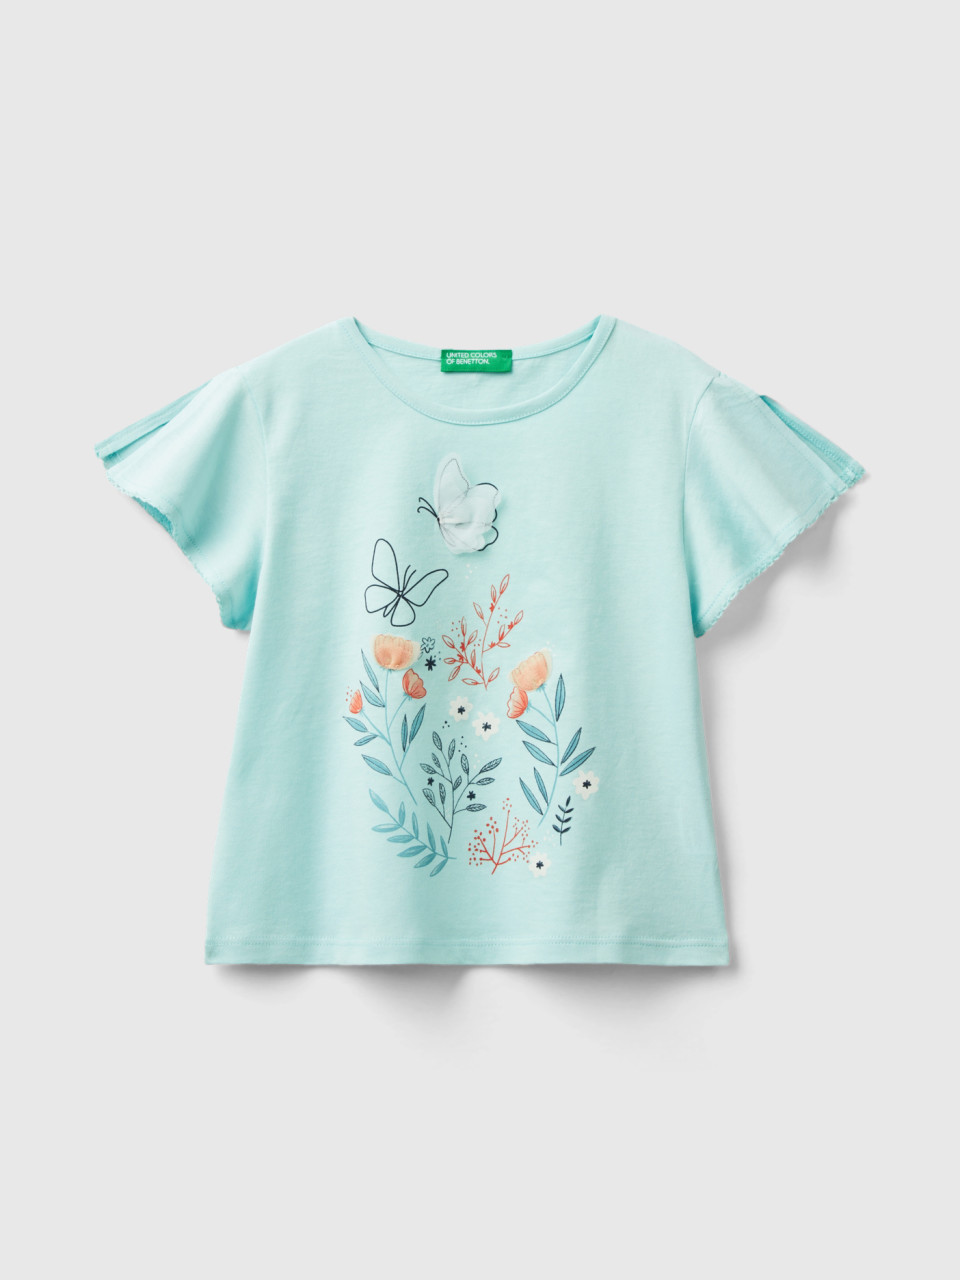 Benetton, T-shirt With Print And Tulle, Aqua, Kids